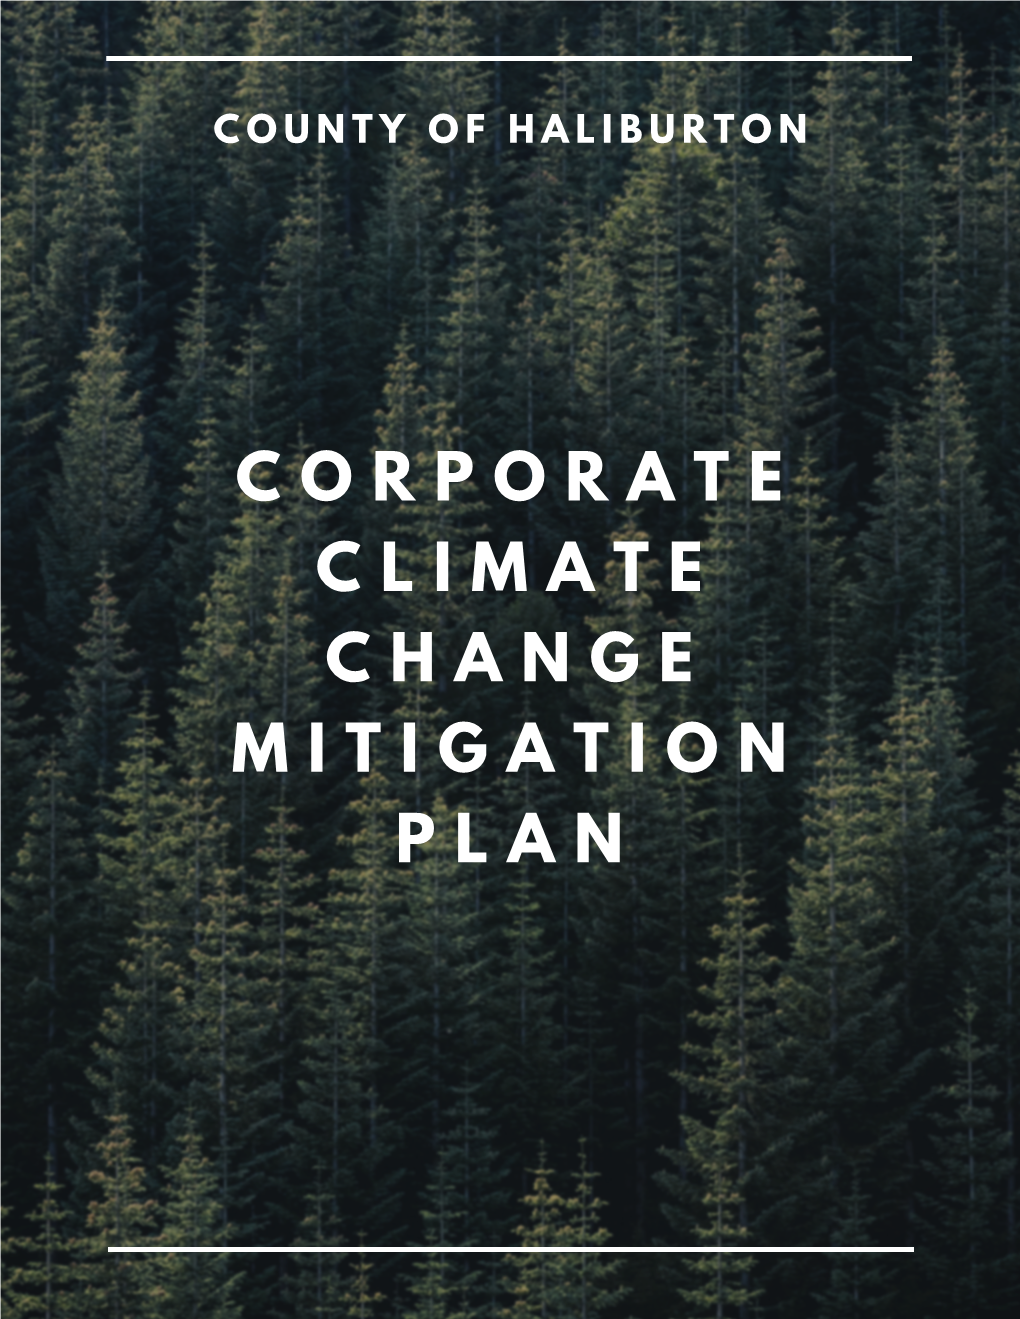 Corporate Climate Change Mitigation Plan Sets a Target to Reduce GHG Emissions Across the County and Its Four Local Municipalities by 30% Below 2018 Levels by 2030